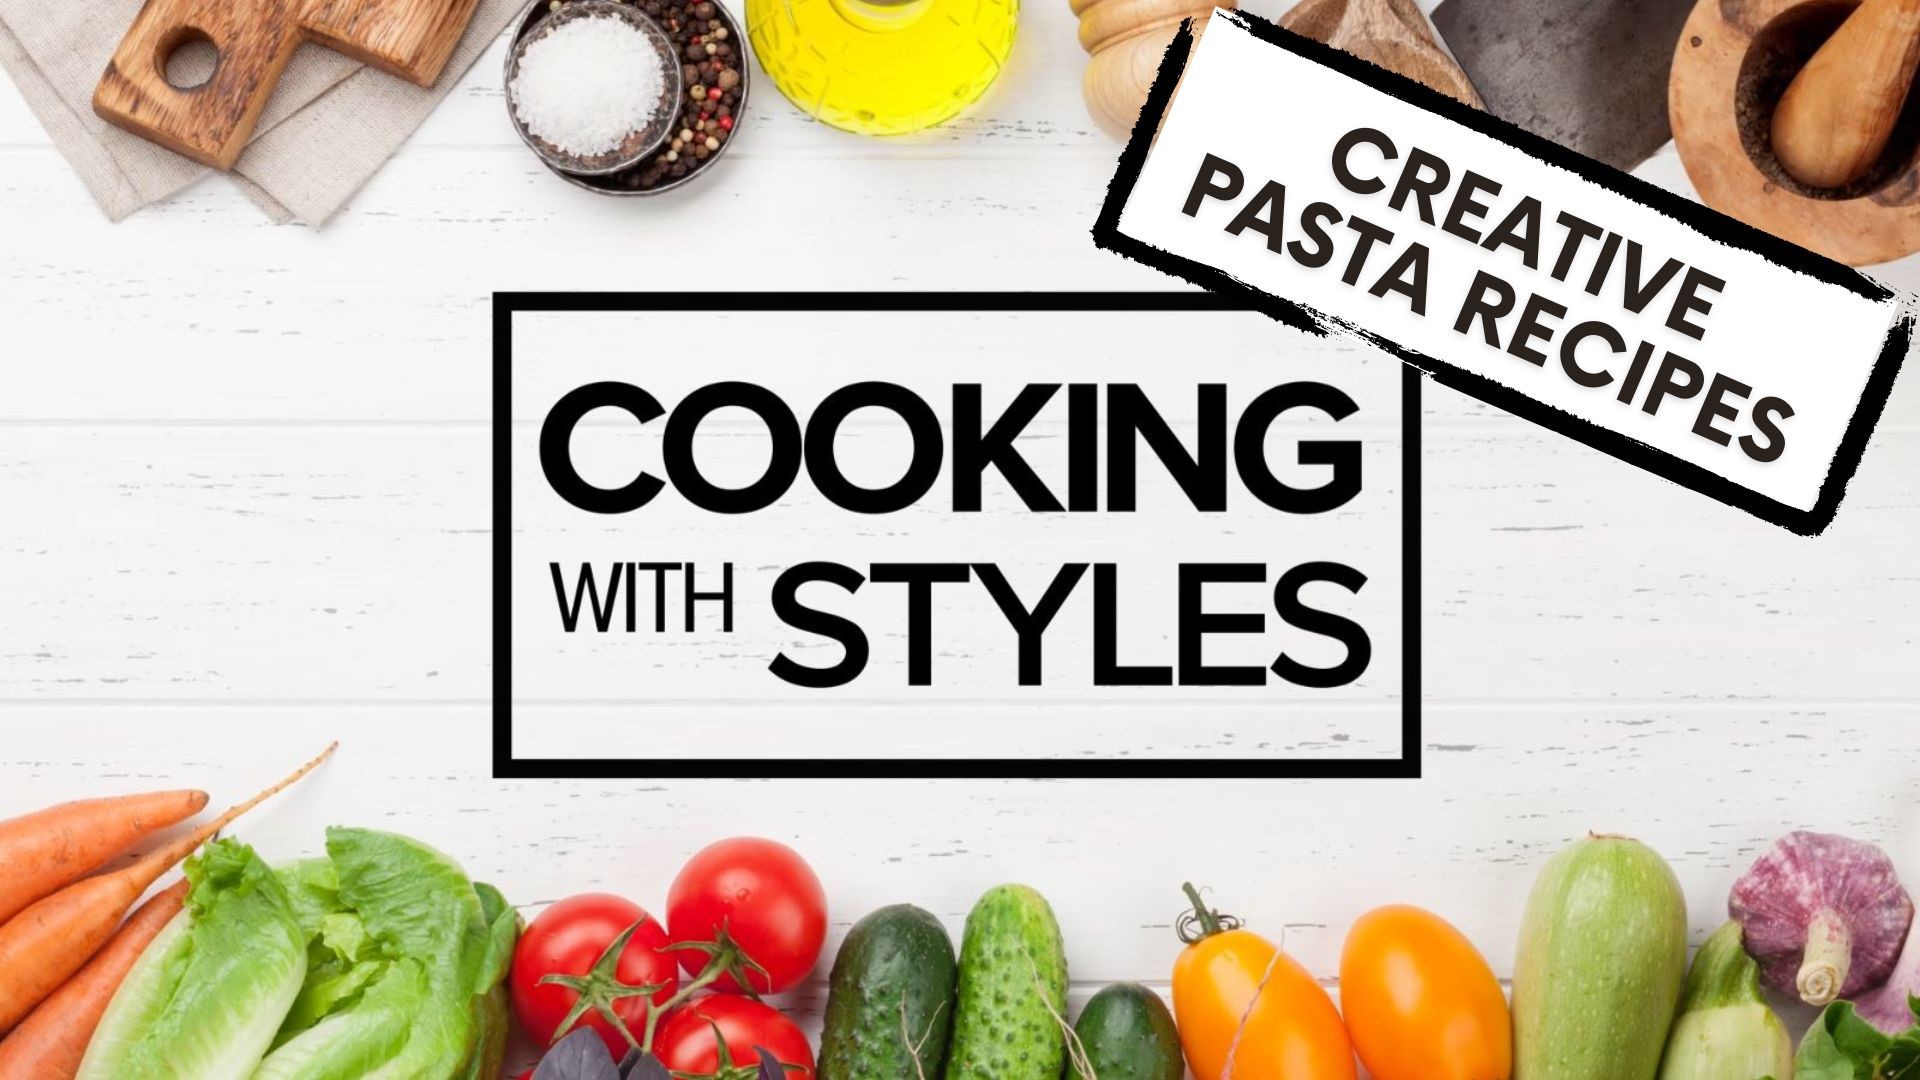 Shawn Styles shares some creative pasta recipes for casual elegance. From baked ravioli lasagna to gnocchi caprese and more.